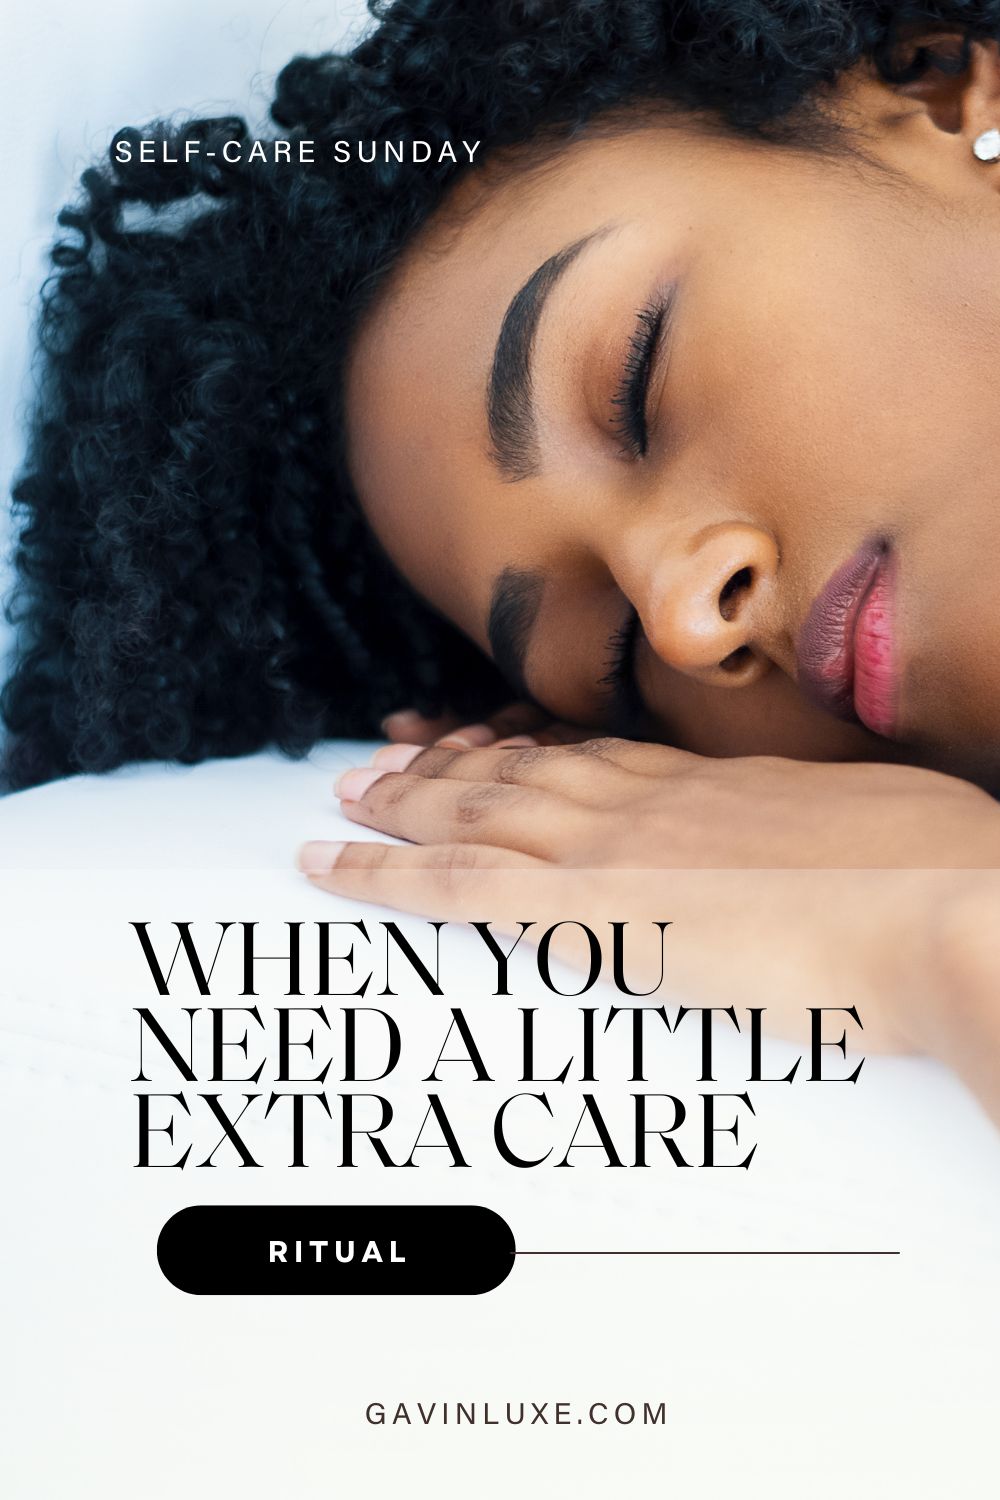 A 5-Minute Self-care Ritual When You Need a Little More